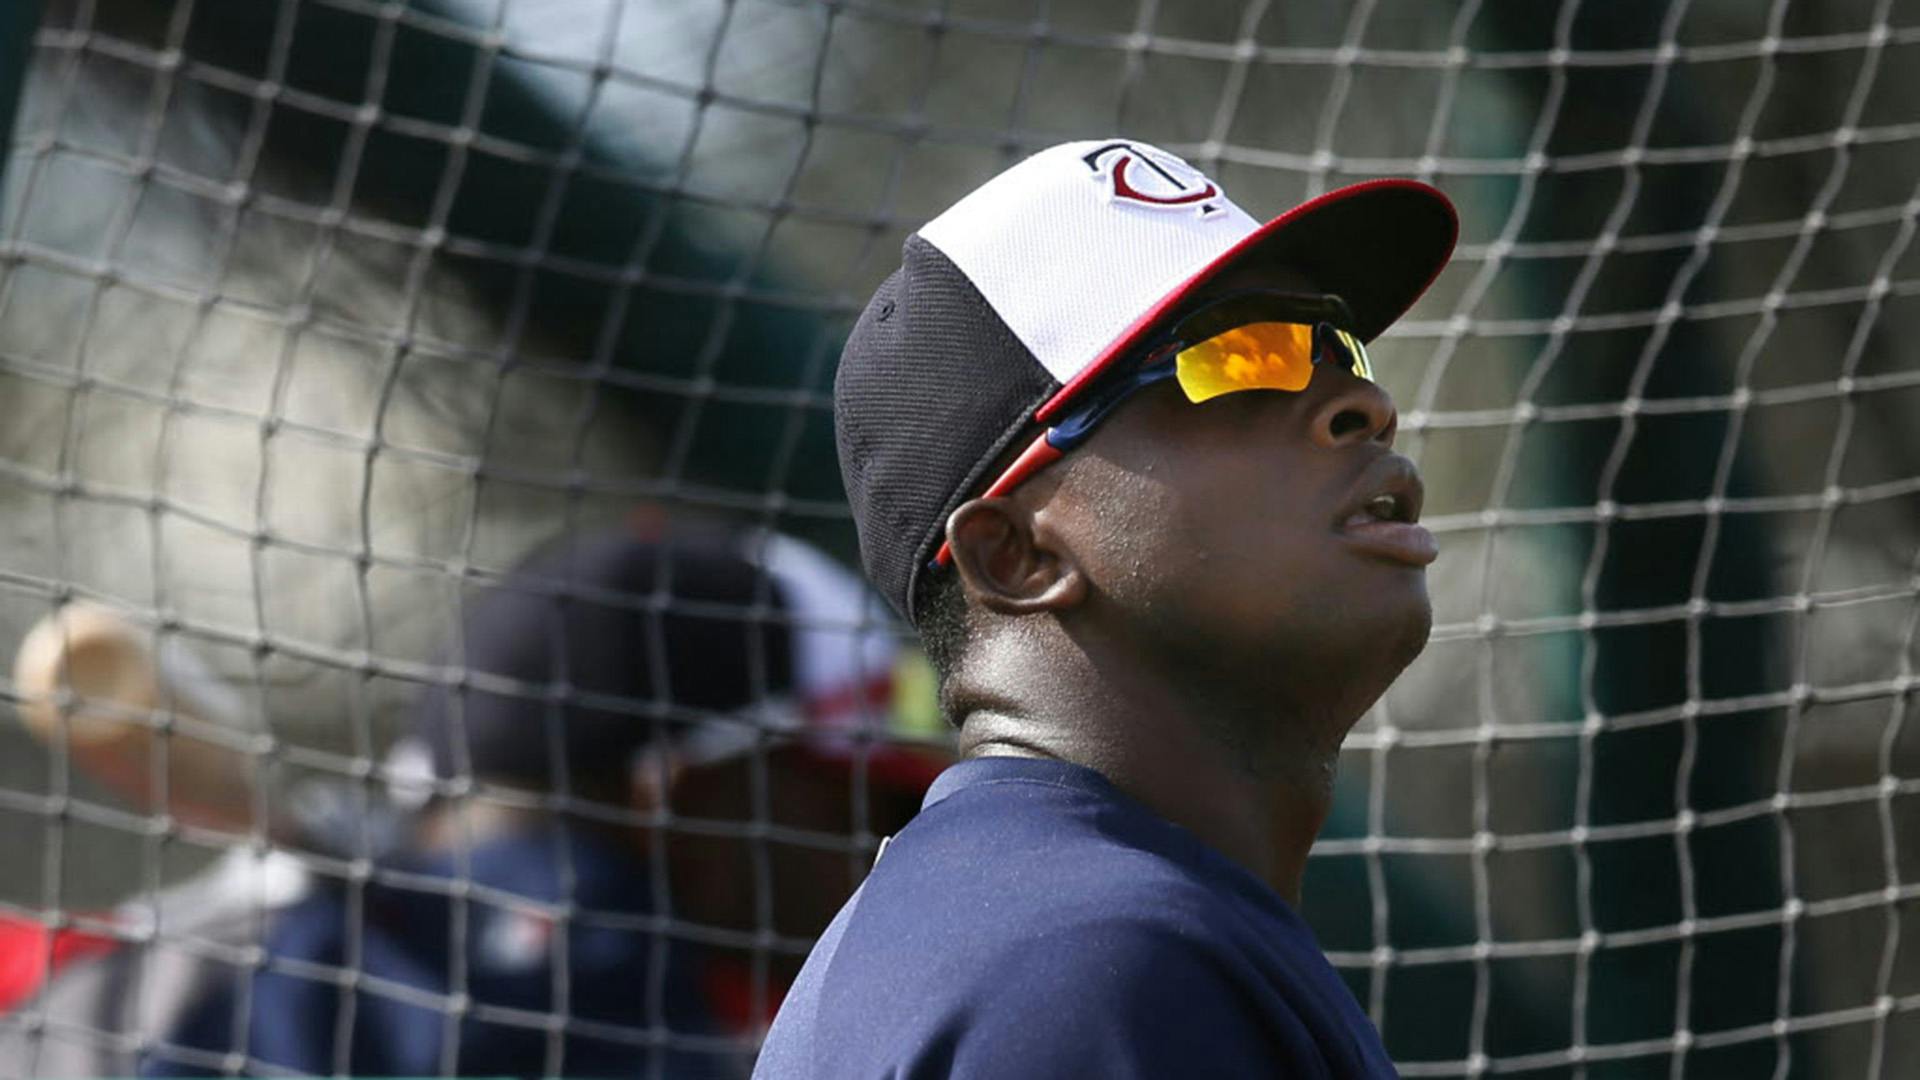 Star Tribune reporter LaVelle E. Neal III and columnist Jim Souhan evaluate Miguel Sano's performance during spring training and discuss when the Twins should call him up to the majors.